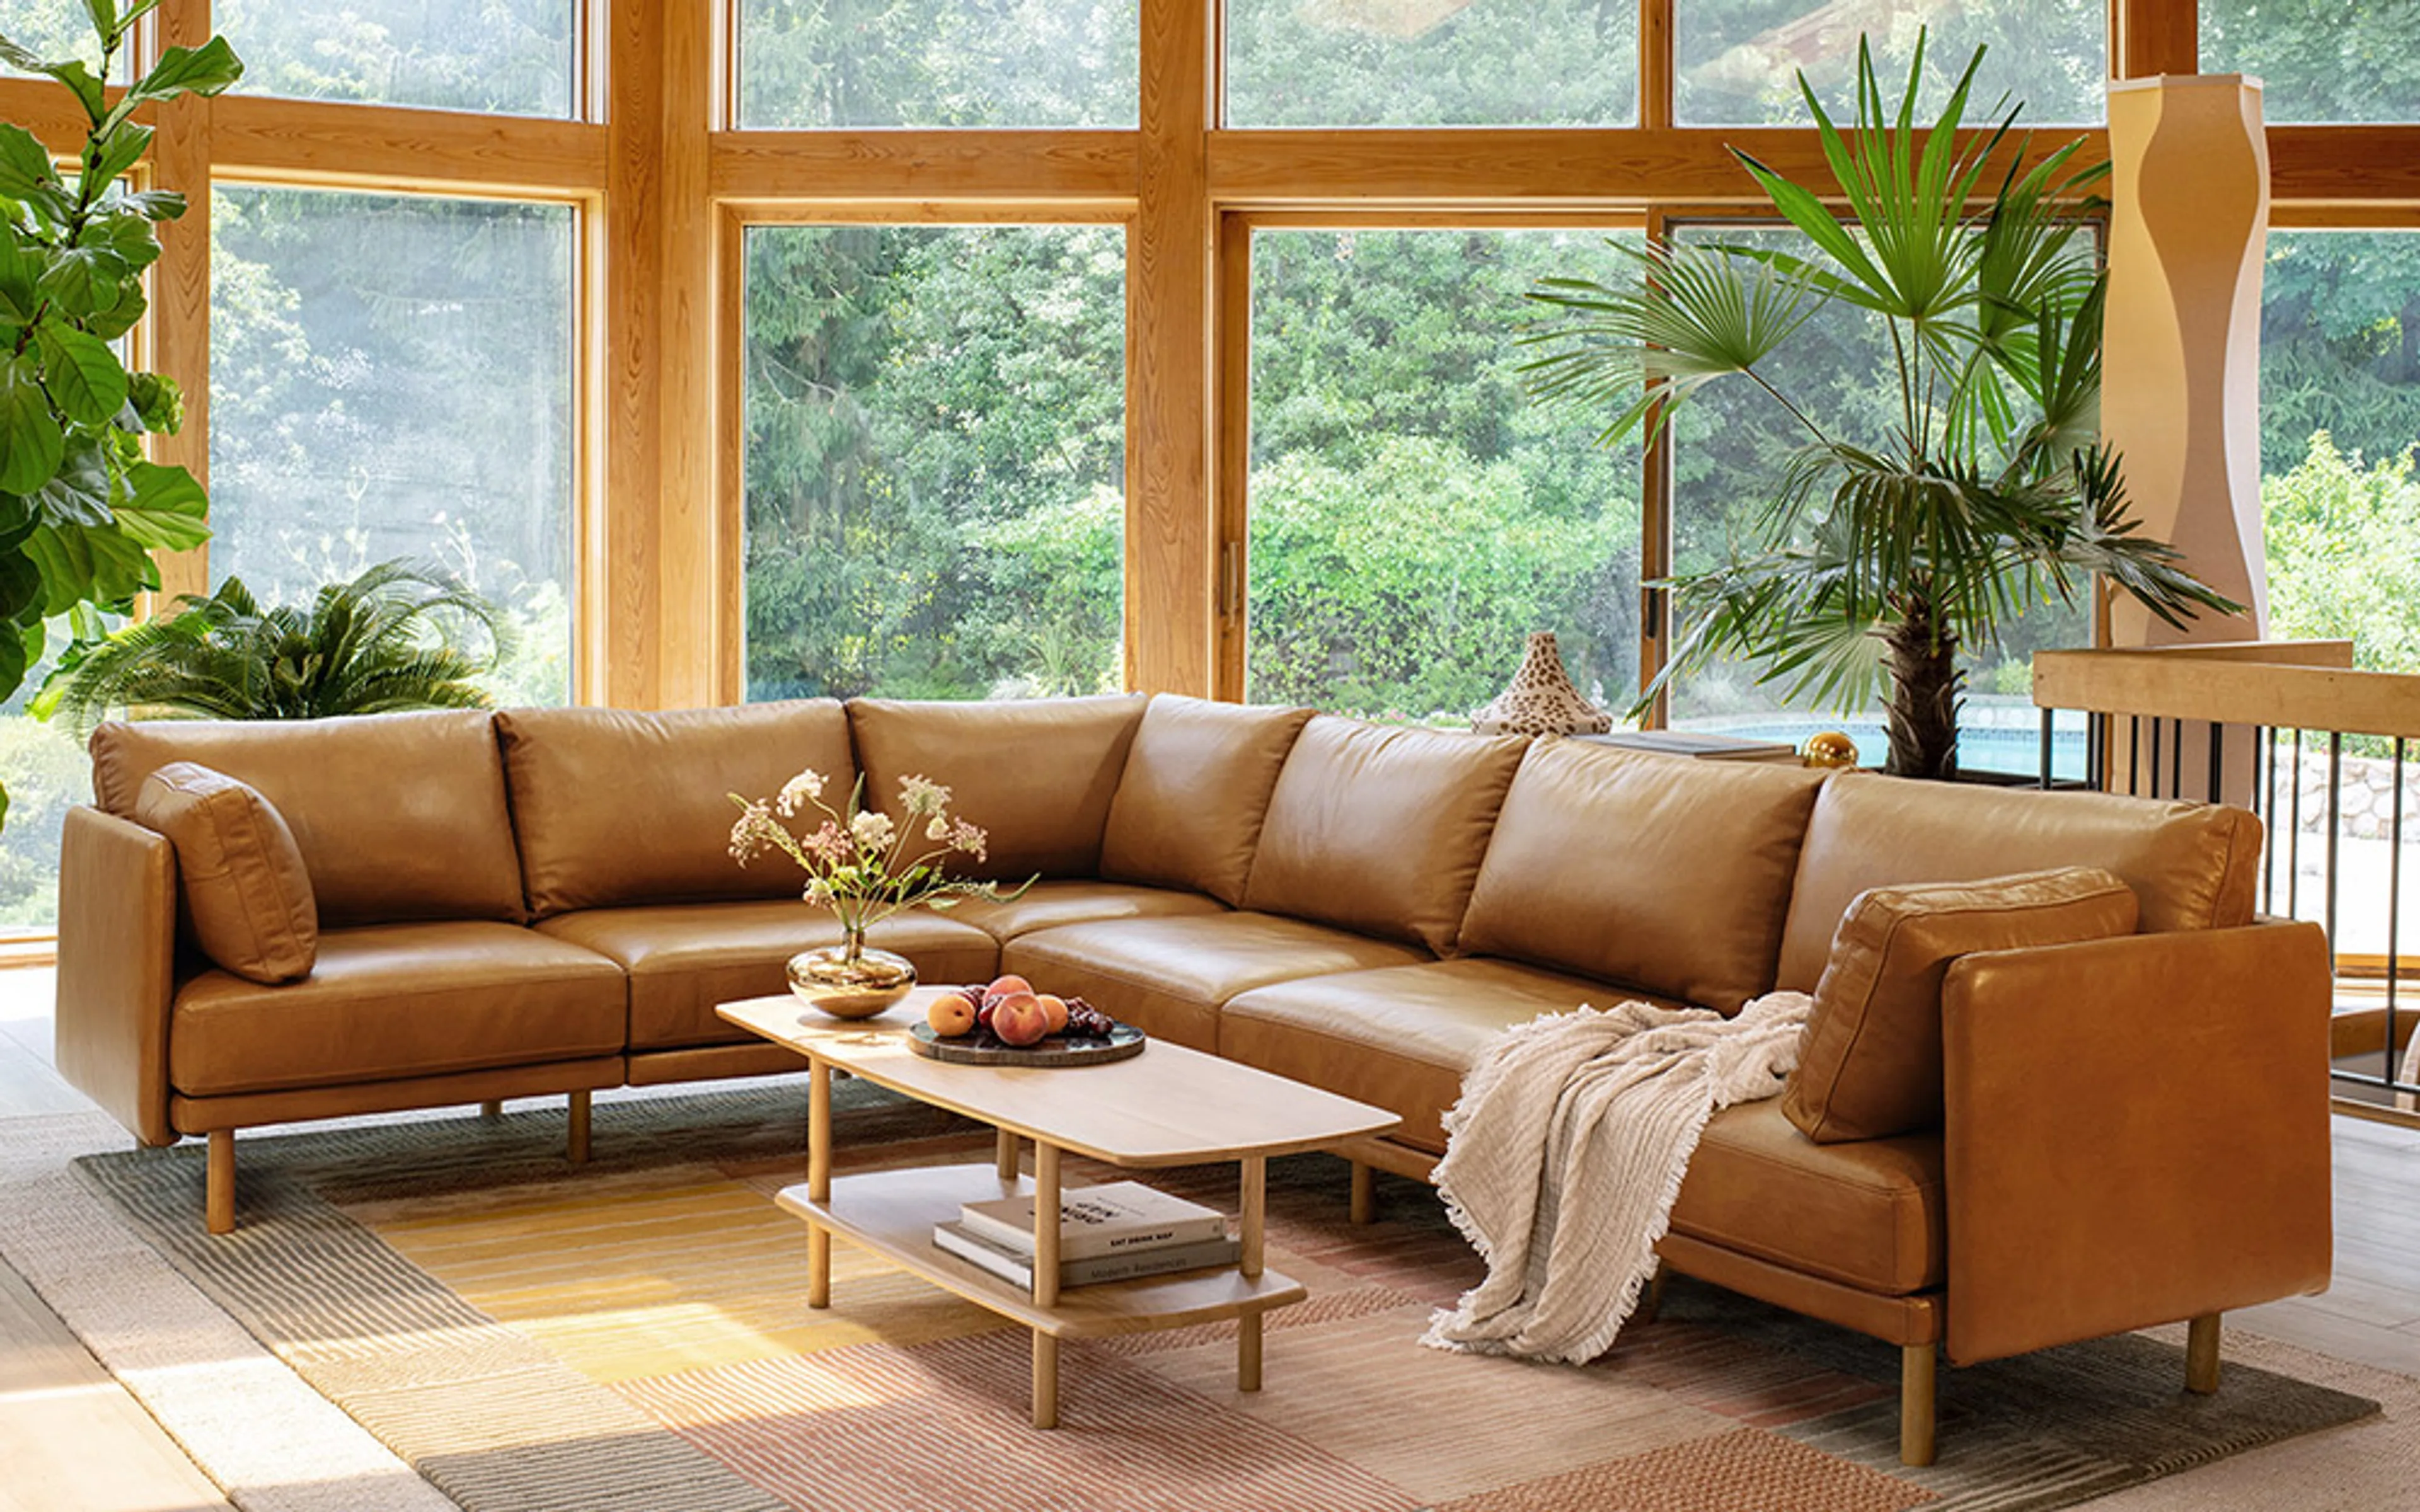 Field Leather 4-Piece Sectional Lounger